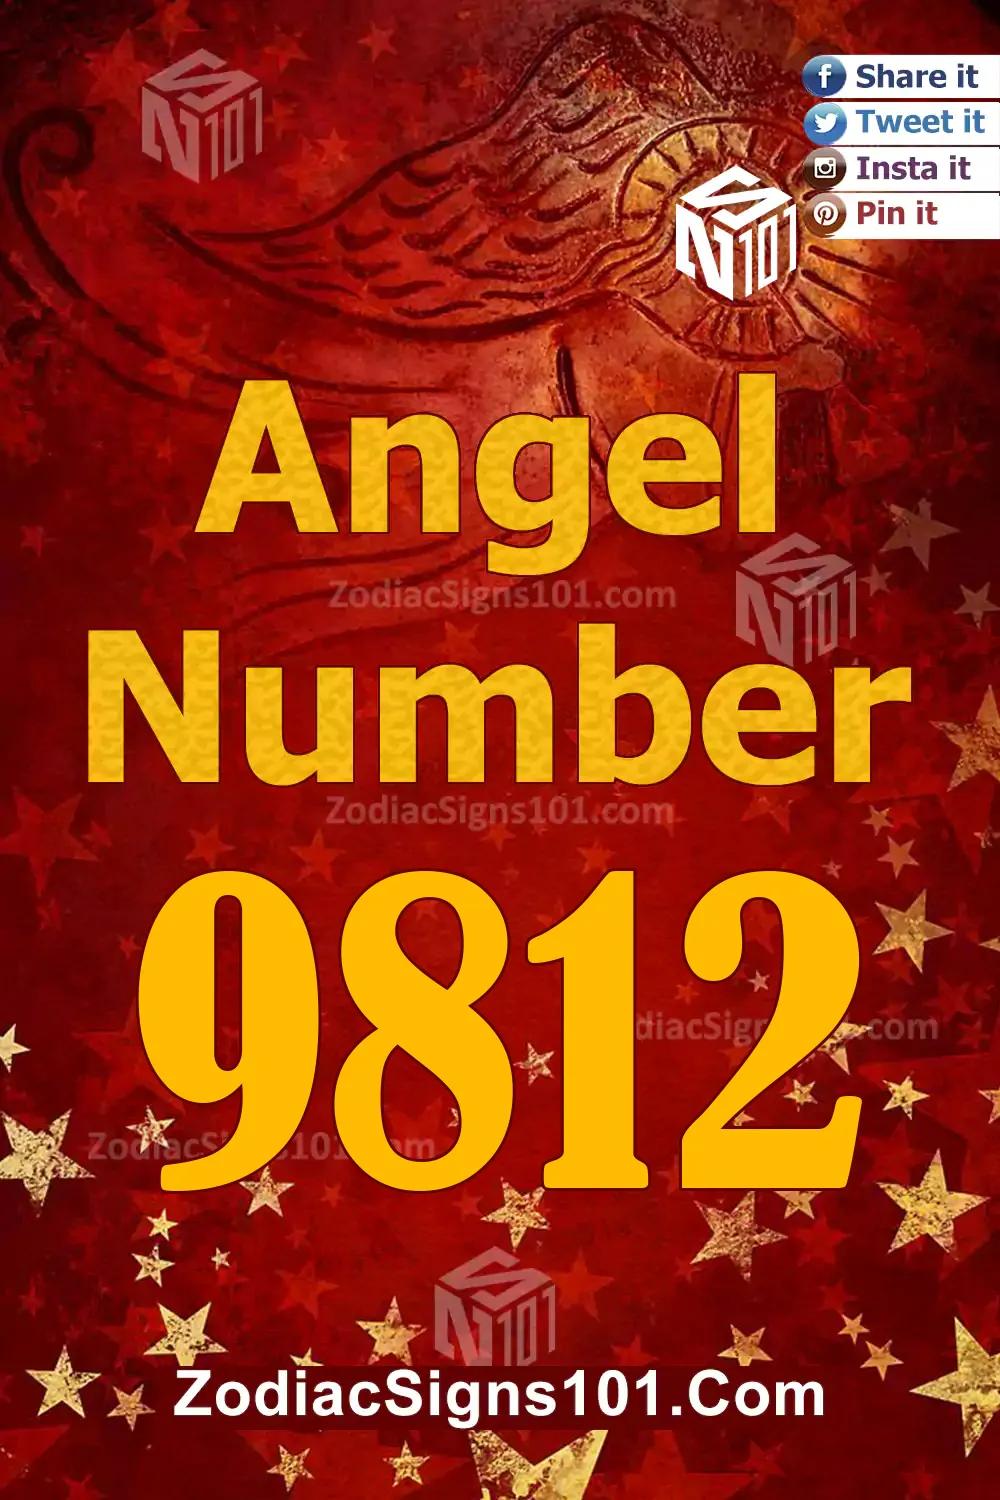 9812 Angel Number Meaning